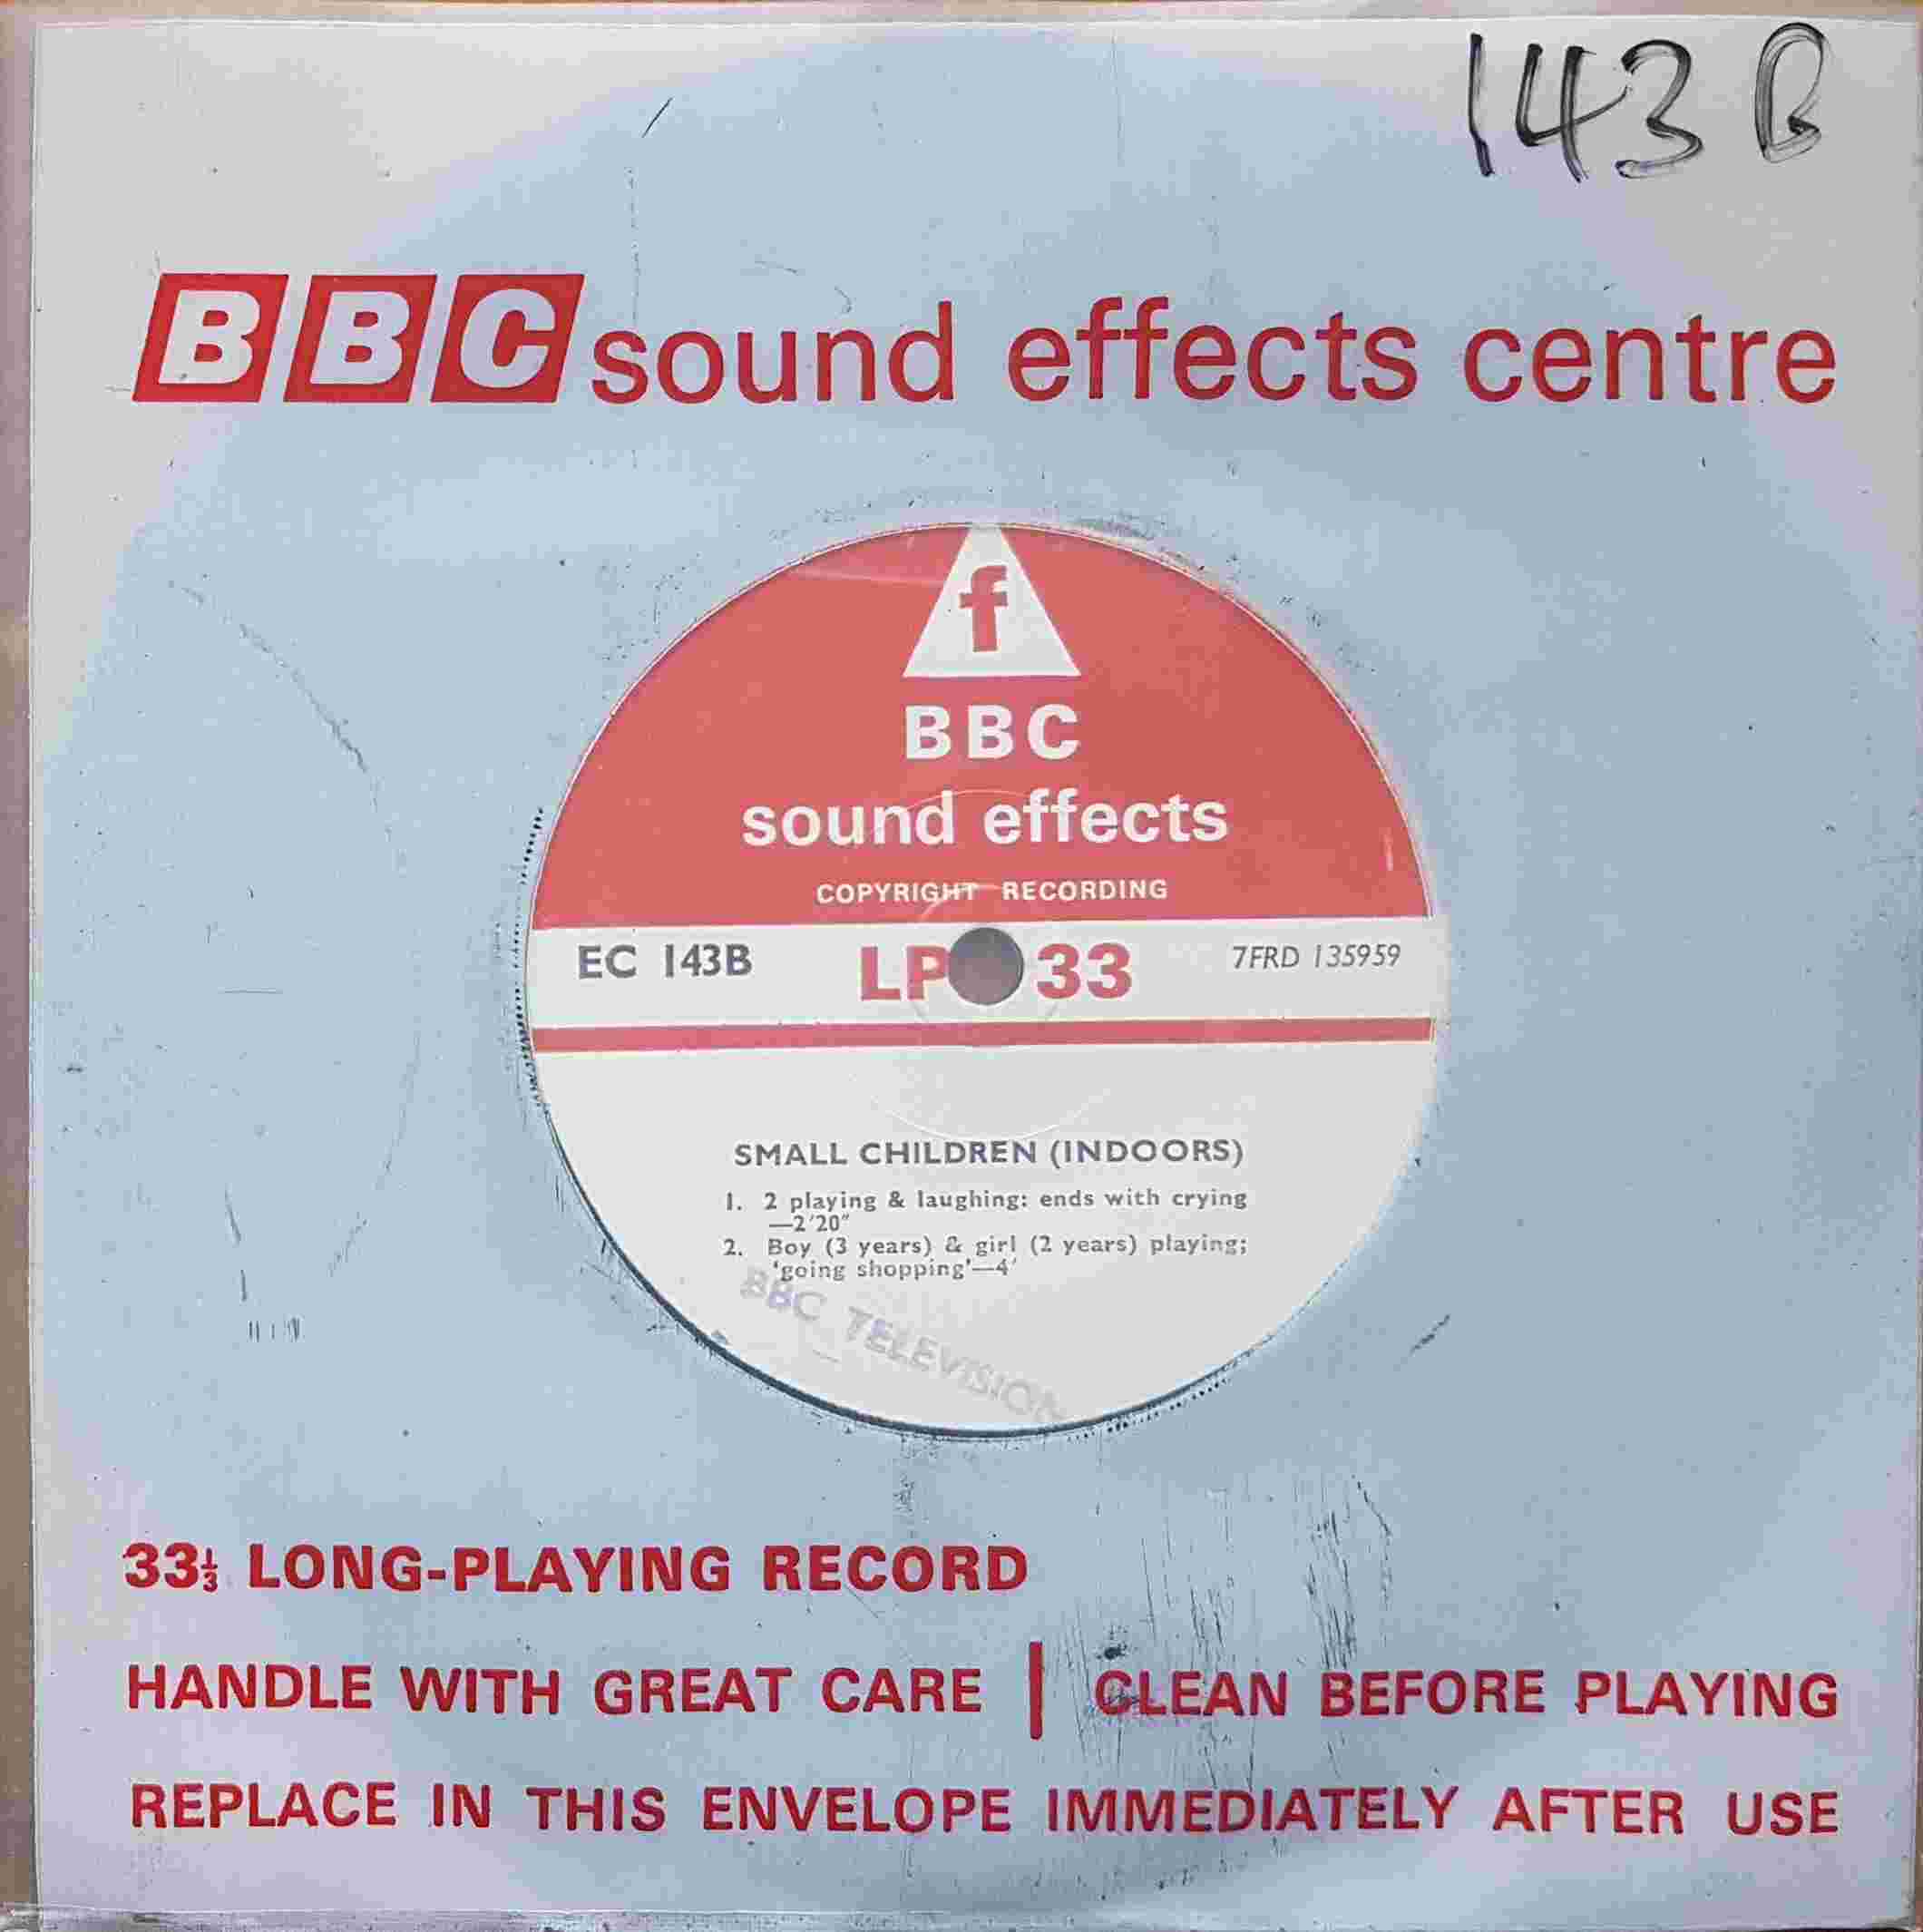 Picture of EC 143B Small children (indoors) by artist Not registered from the BBC records and Tapes library